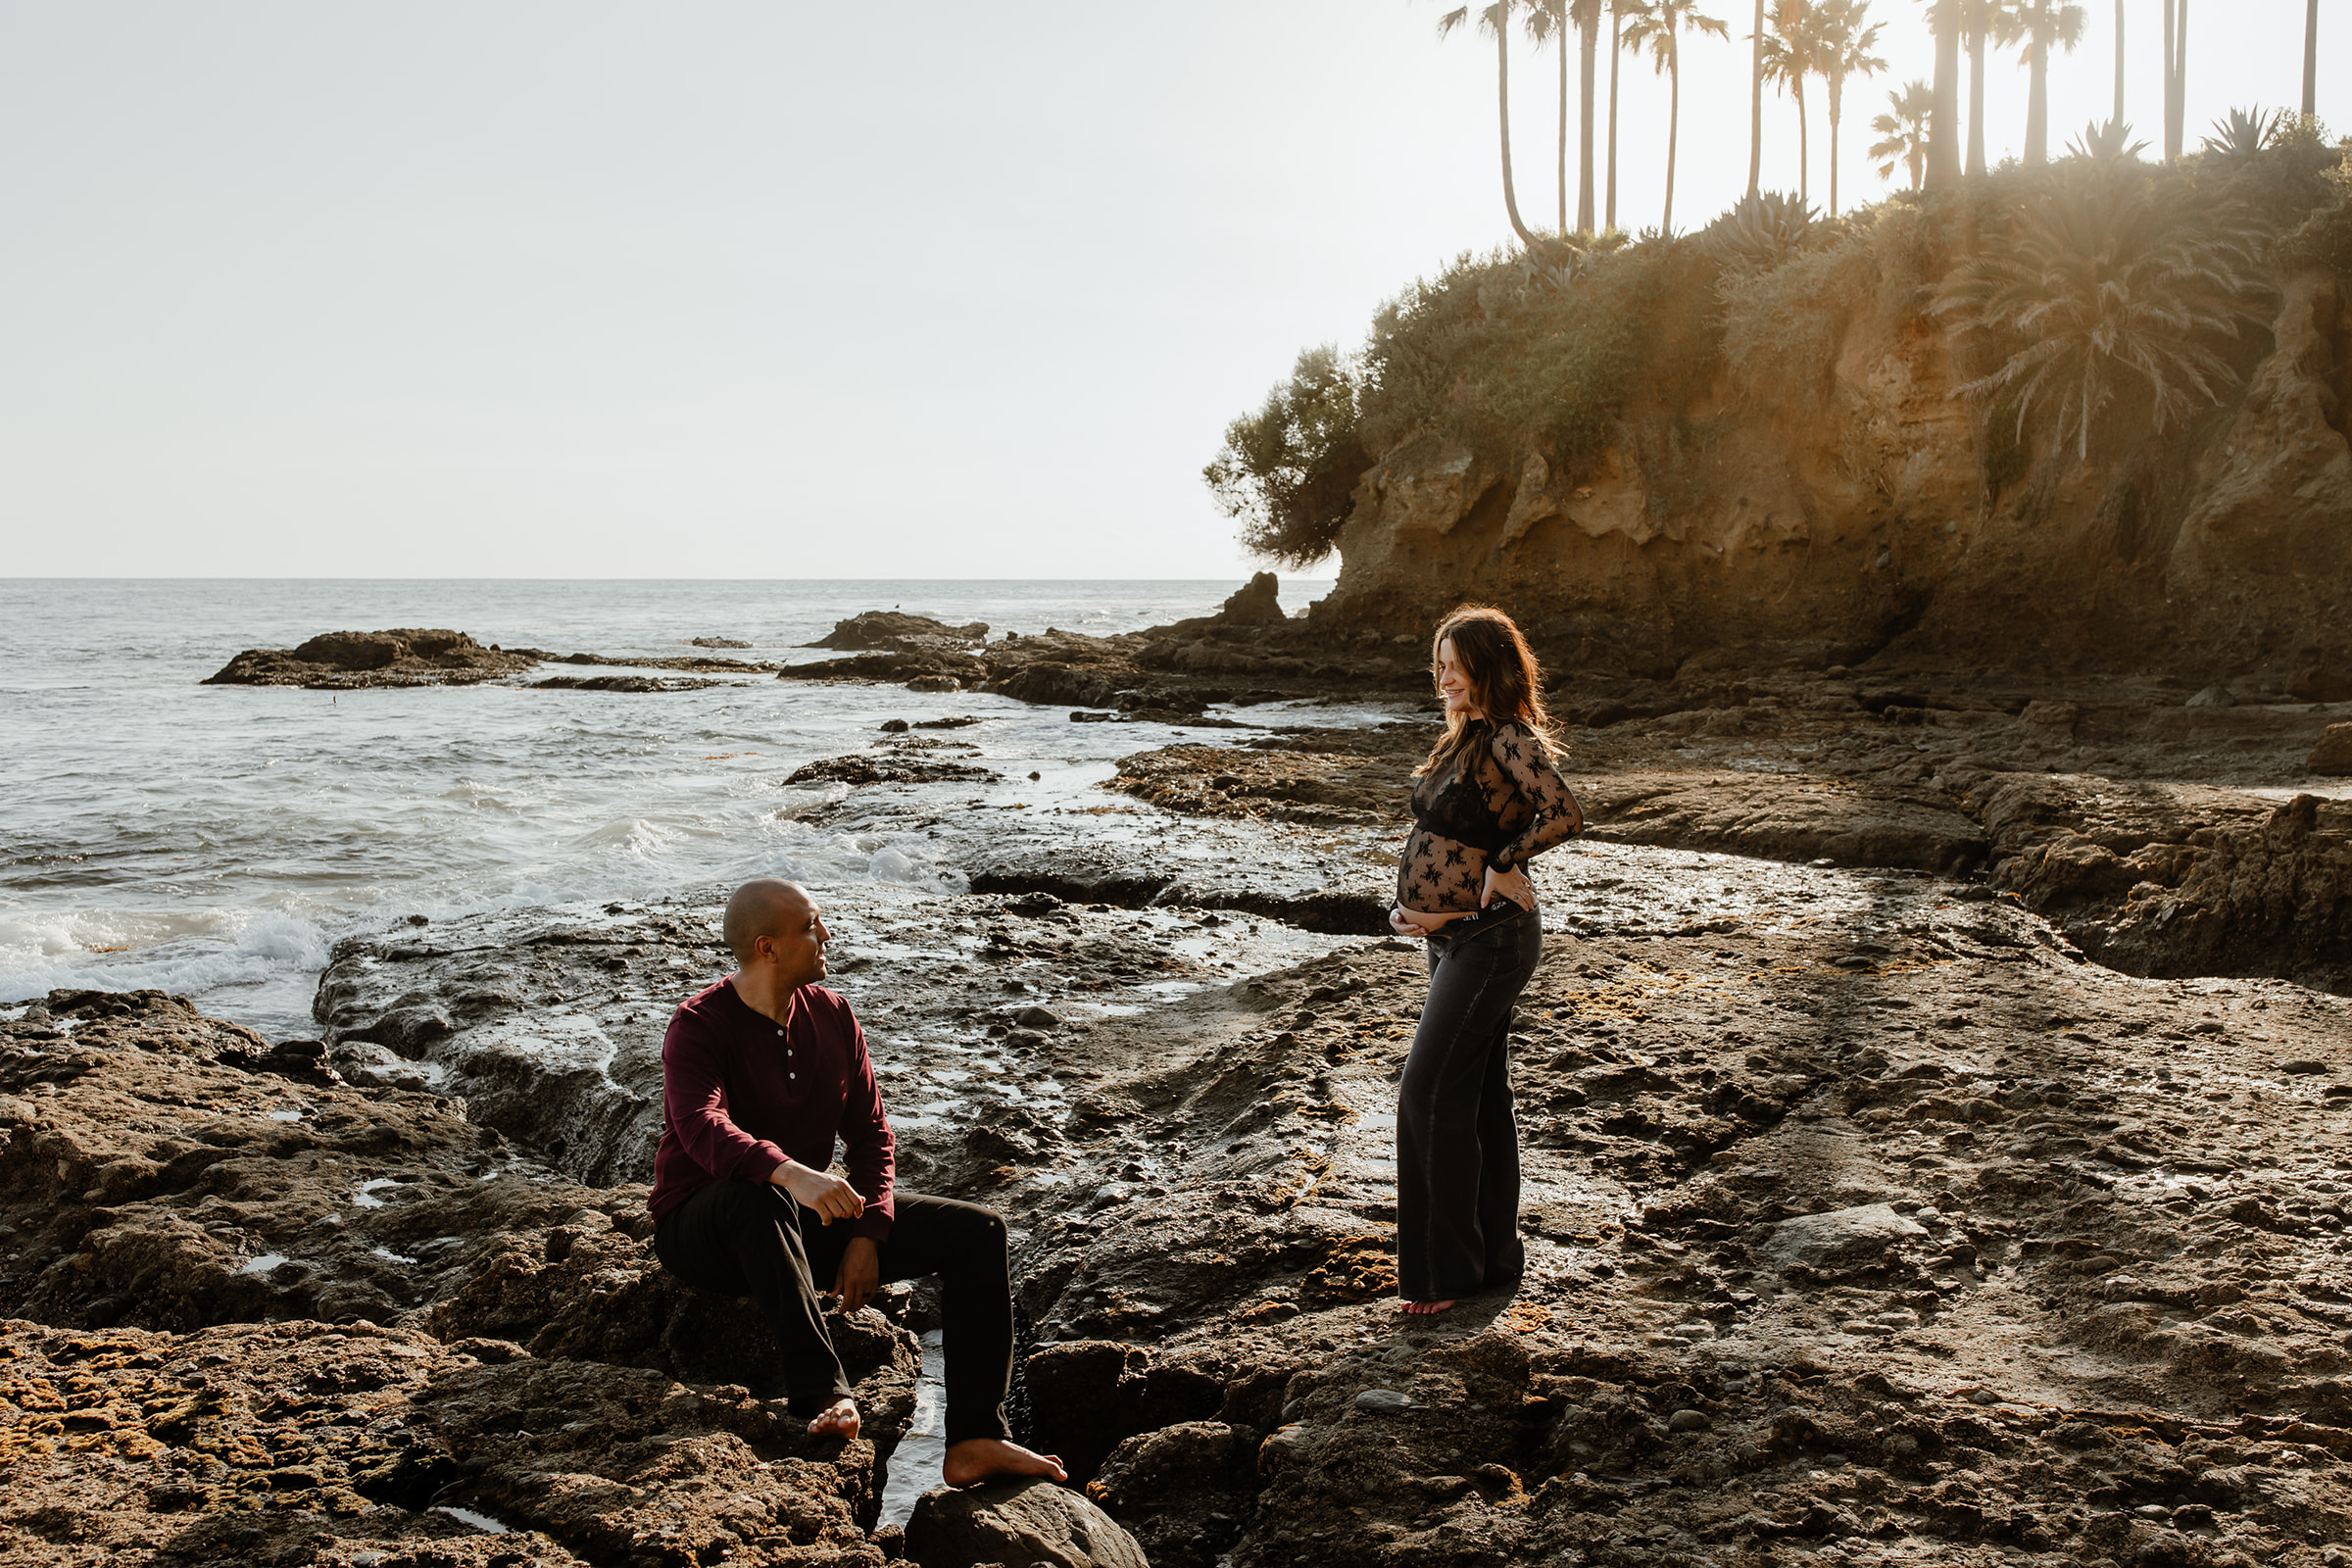 A couple at the beach for their maternity session, laguna beach, palm trees behind them, sun in the background